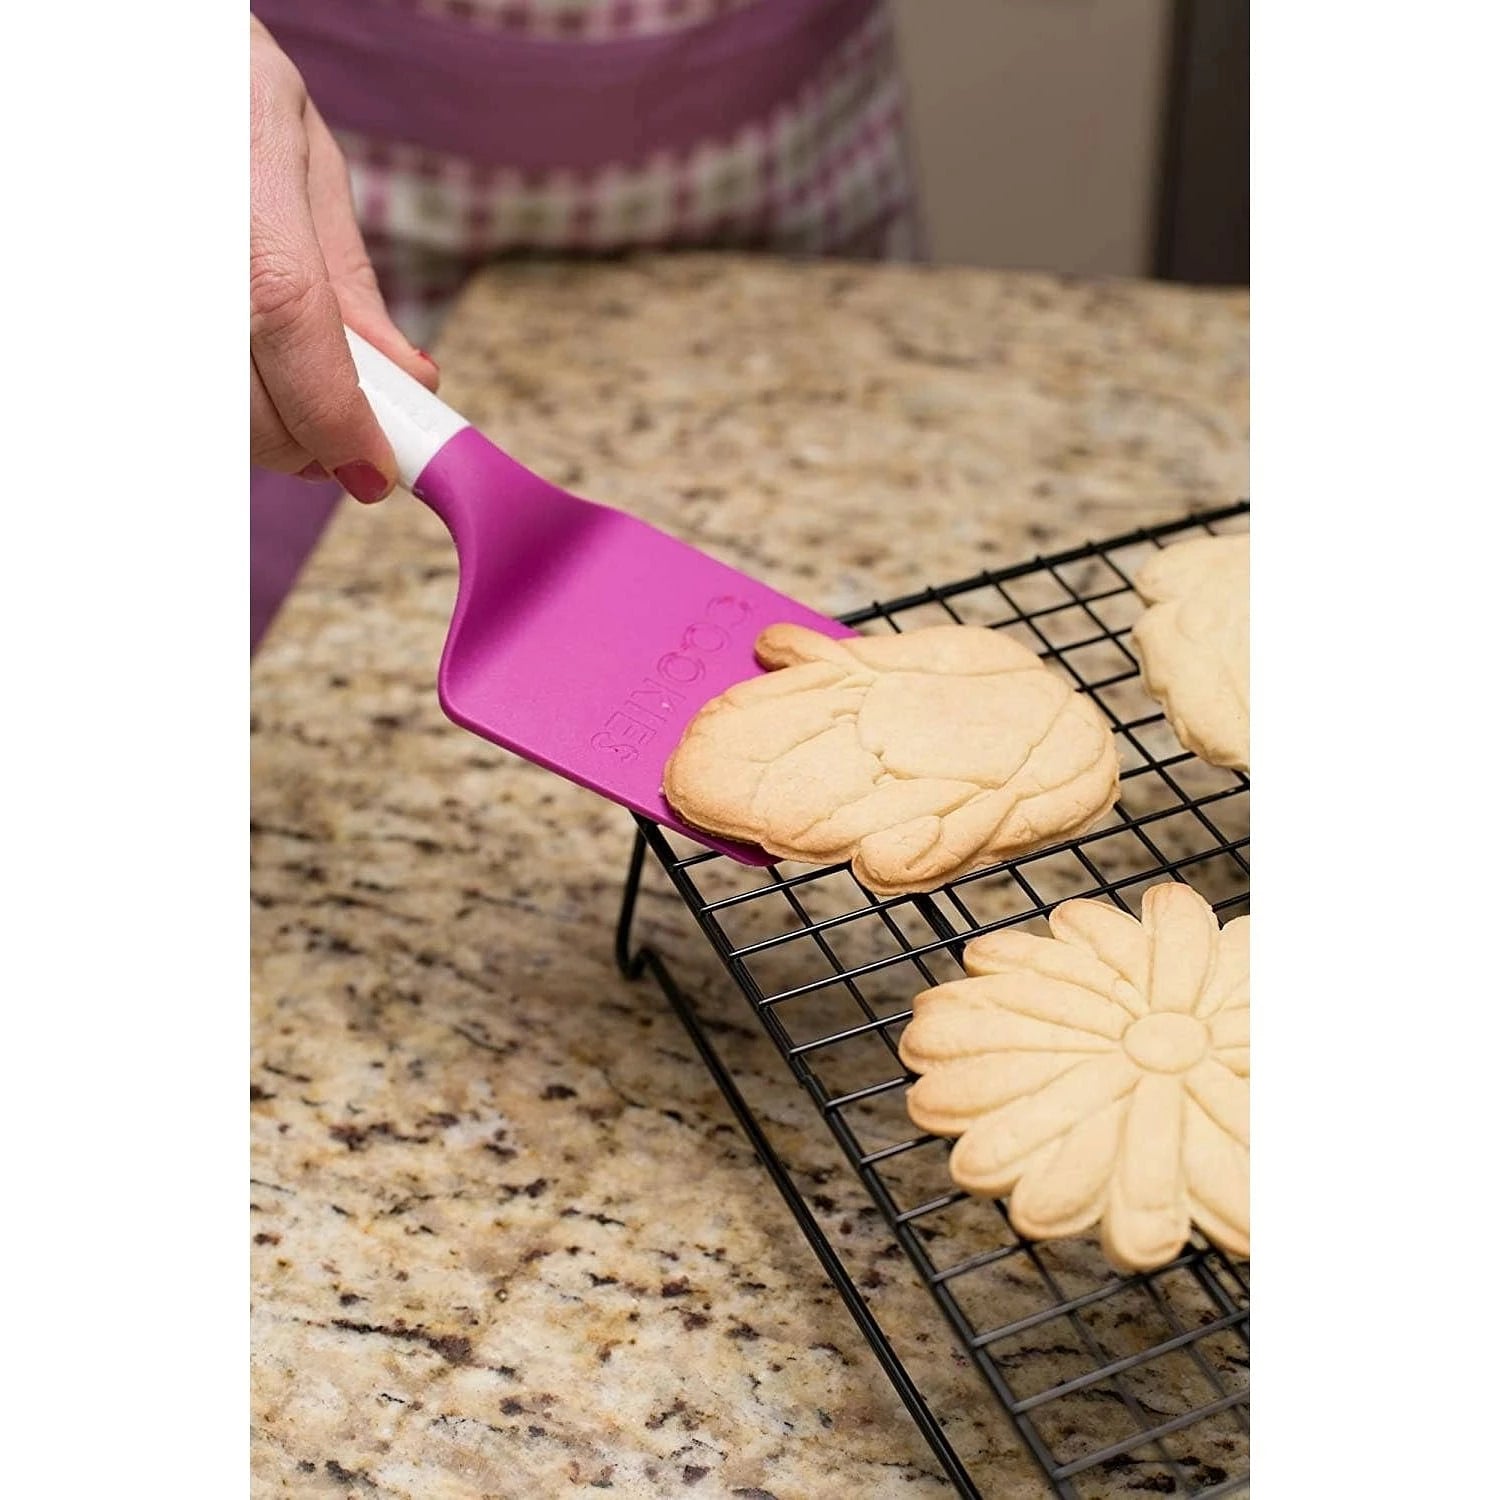 Our FAVORITE Rubber Spatula! – The Cookie Kitchen Bakery